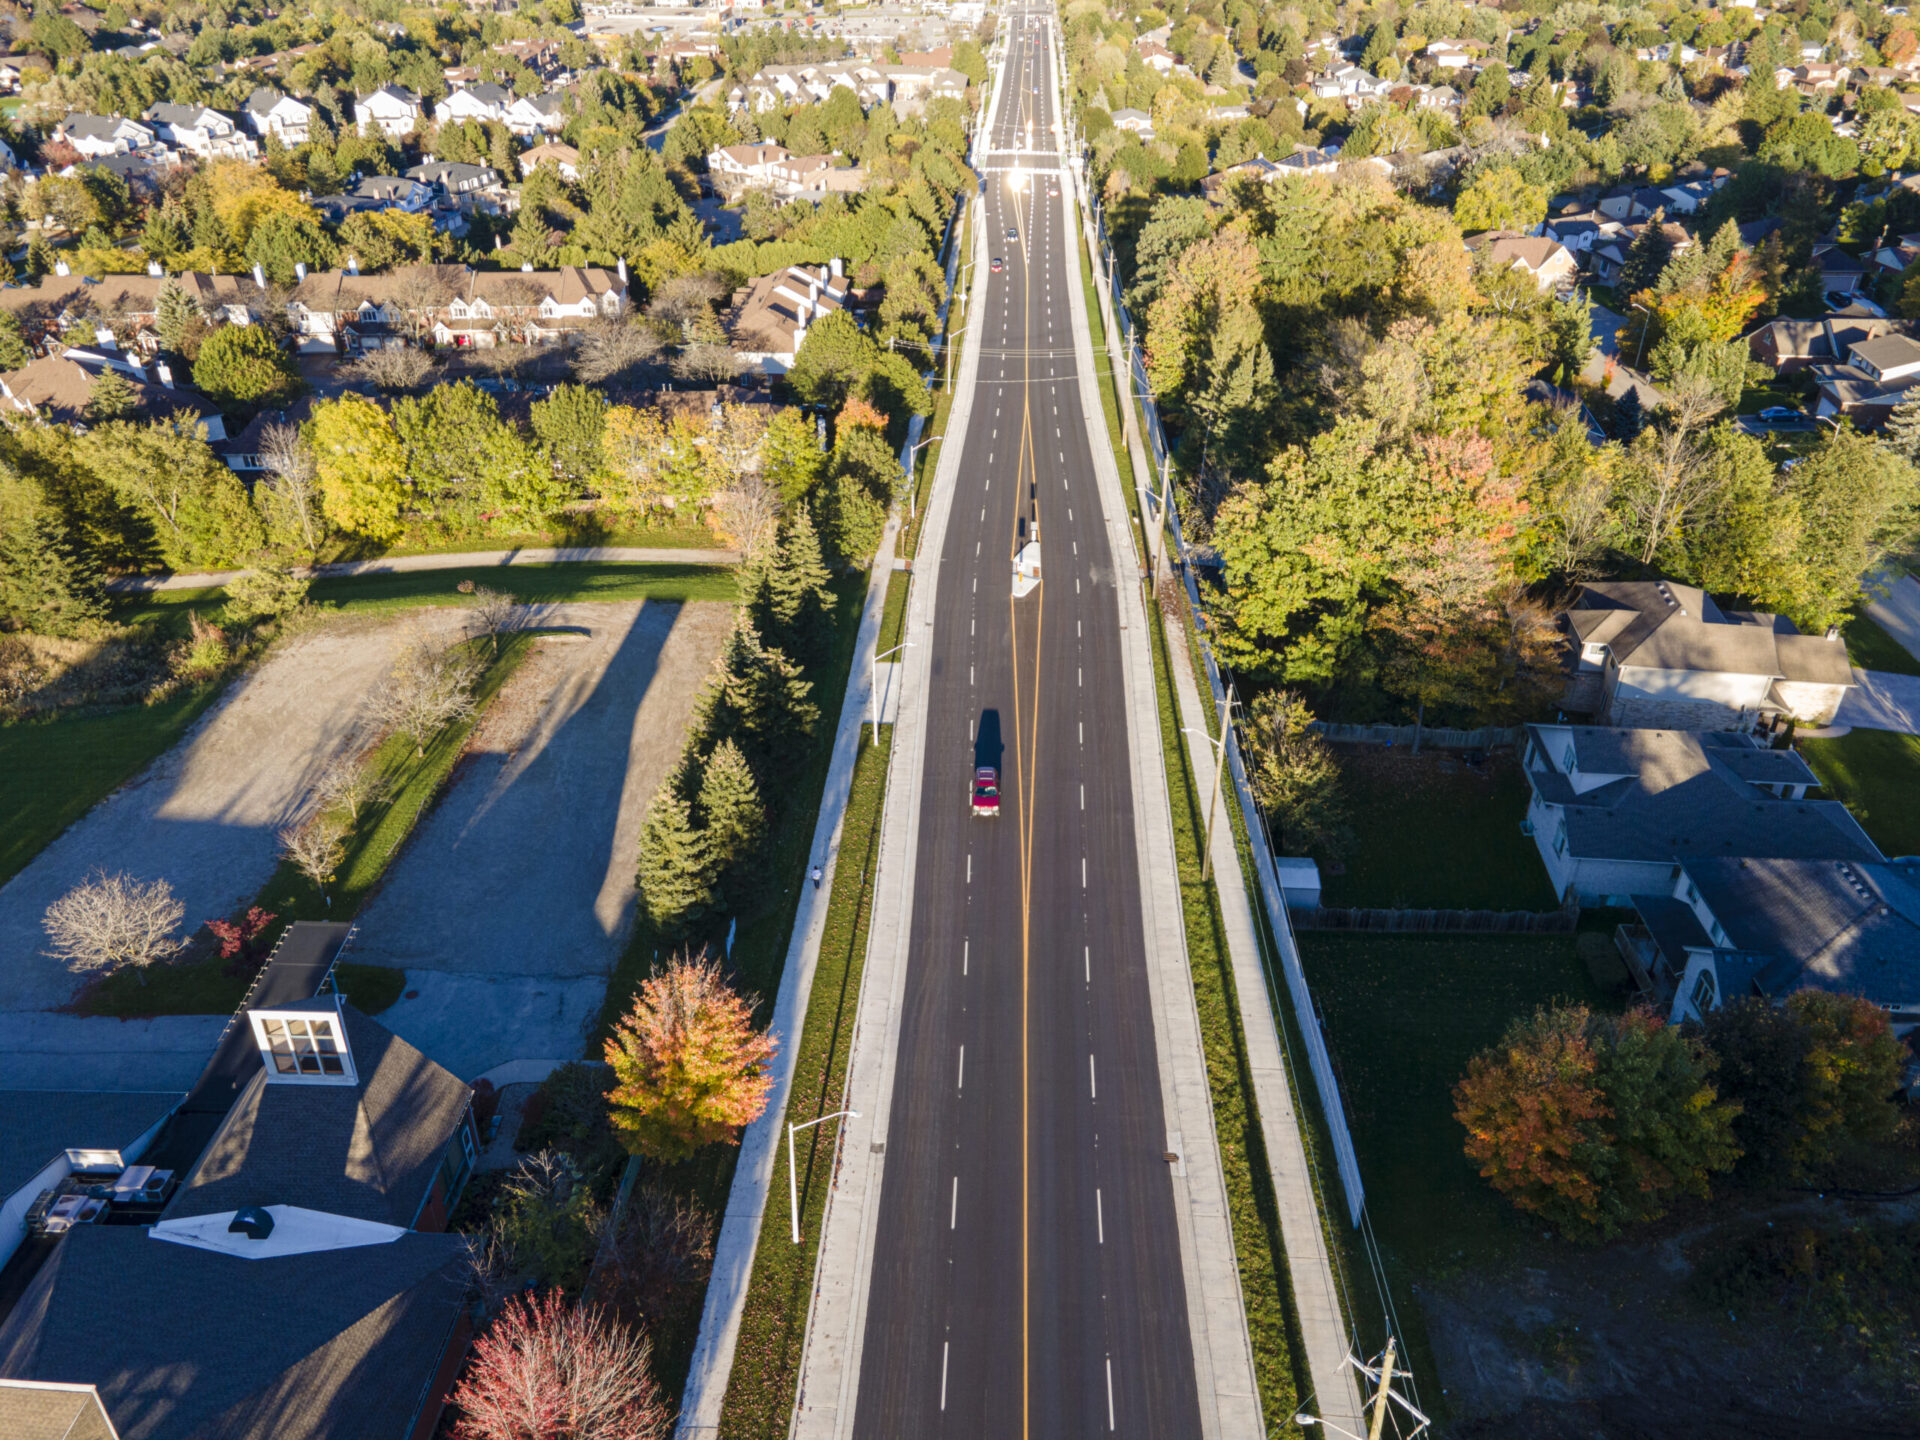 An aerial view of an engineered highway in a residential area.